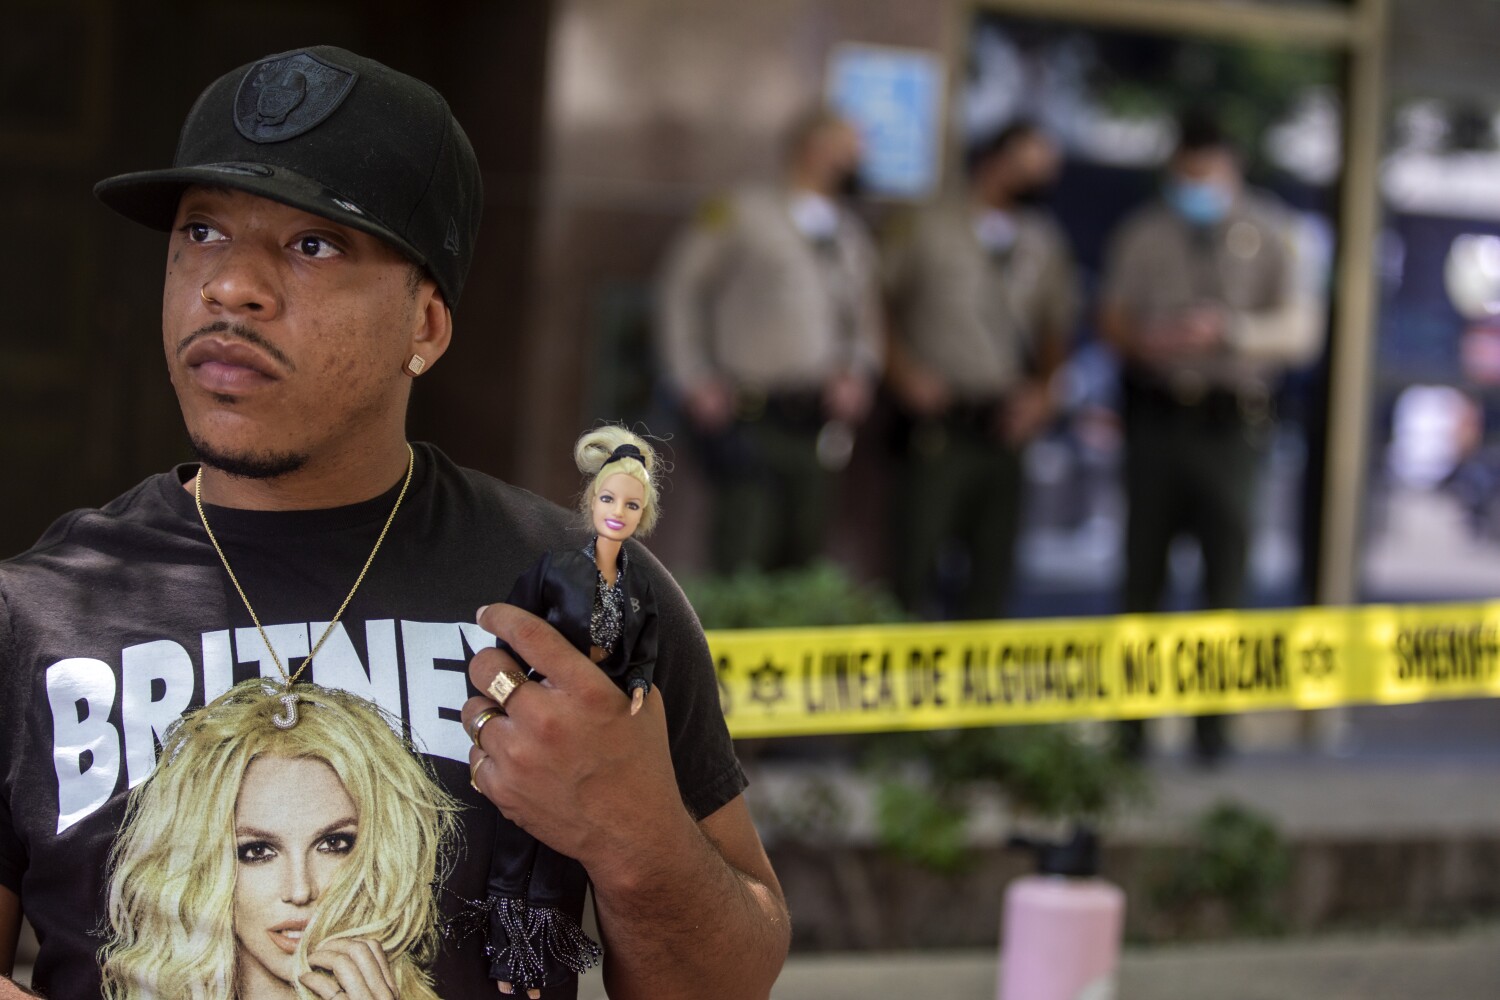 PHOTOS: Britney Spears' supporters rally against conservatorship in L.A. and D.C.